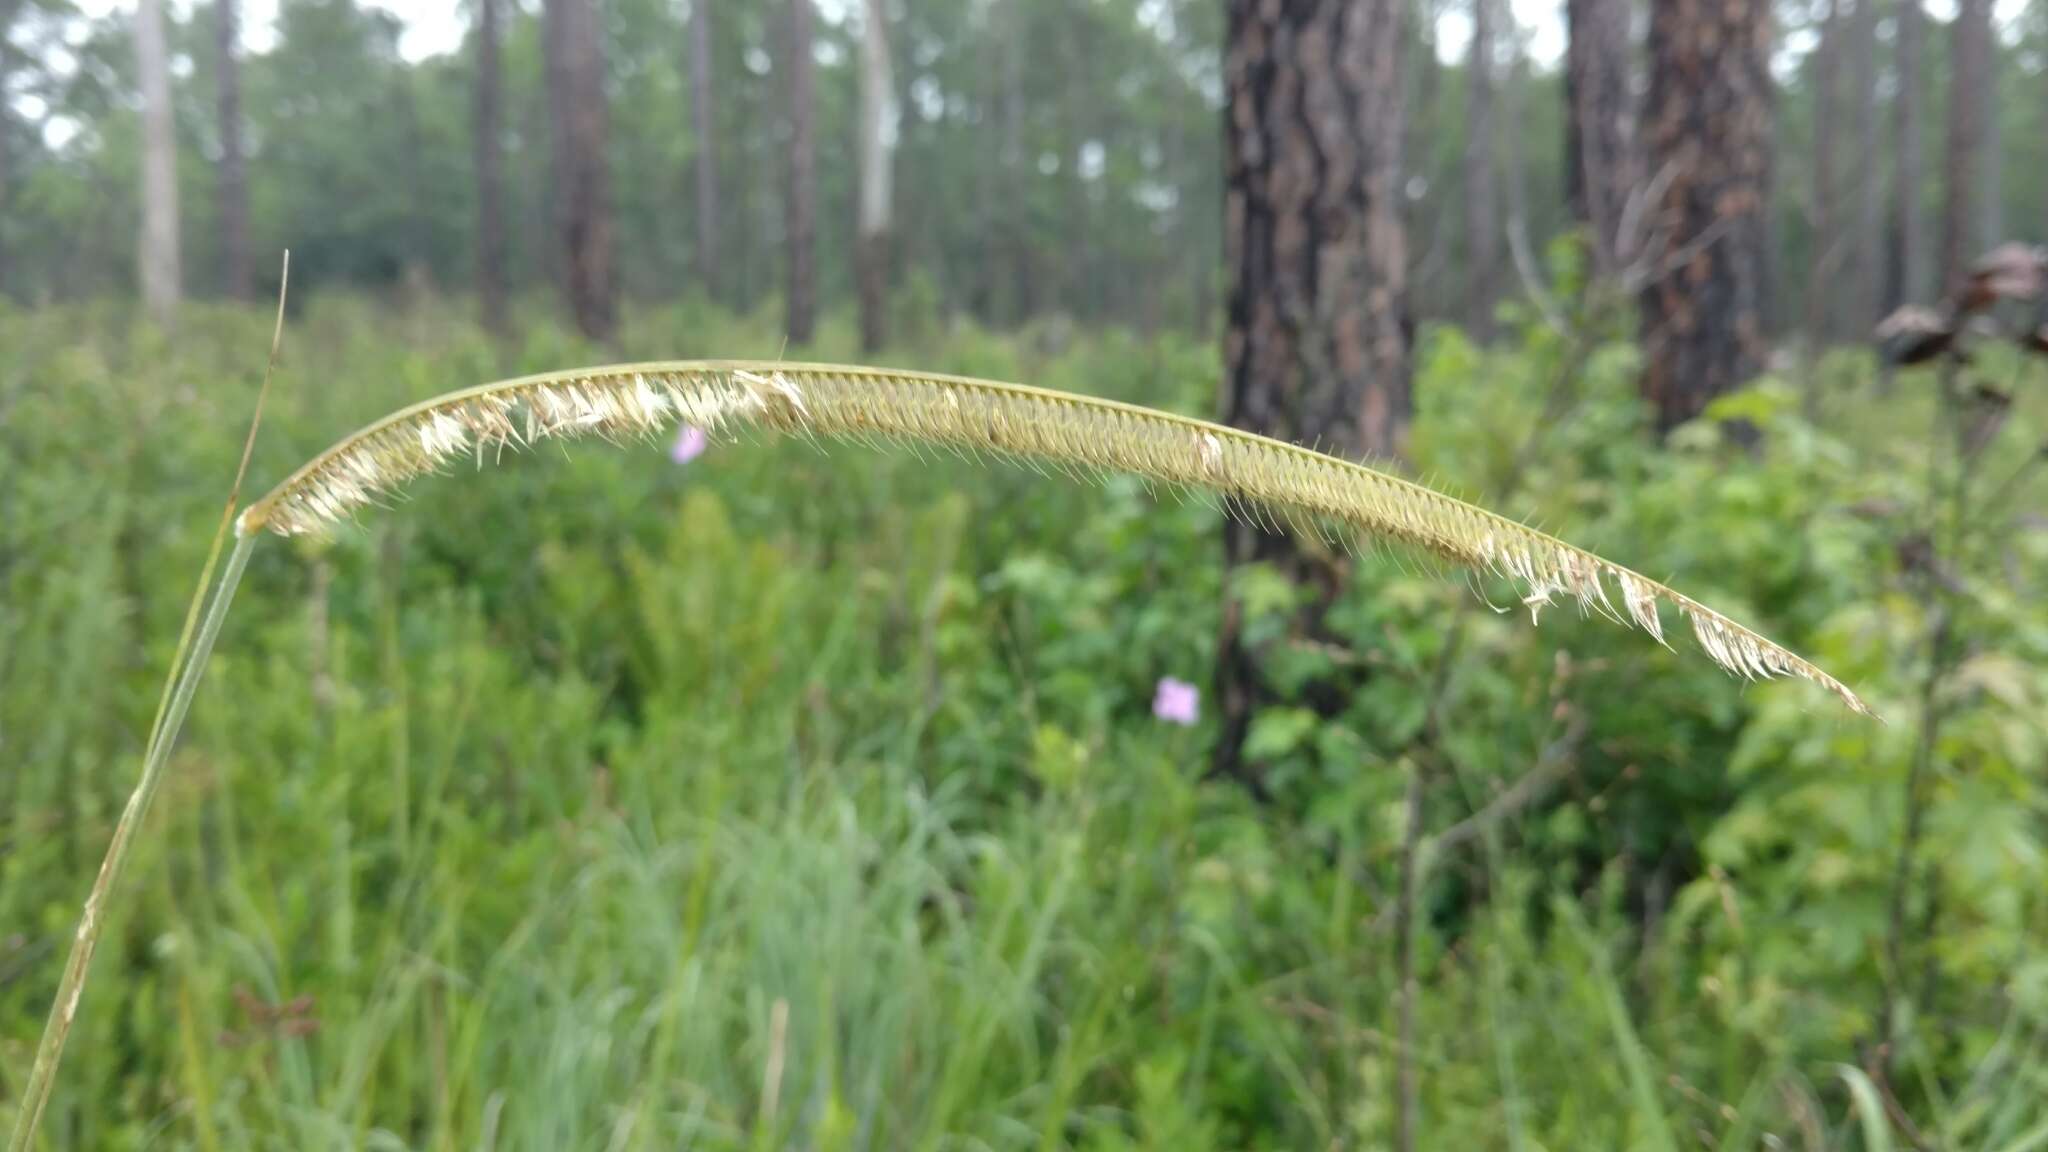 Image of toothache grass